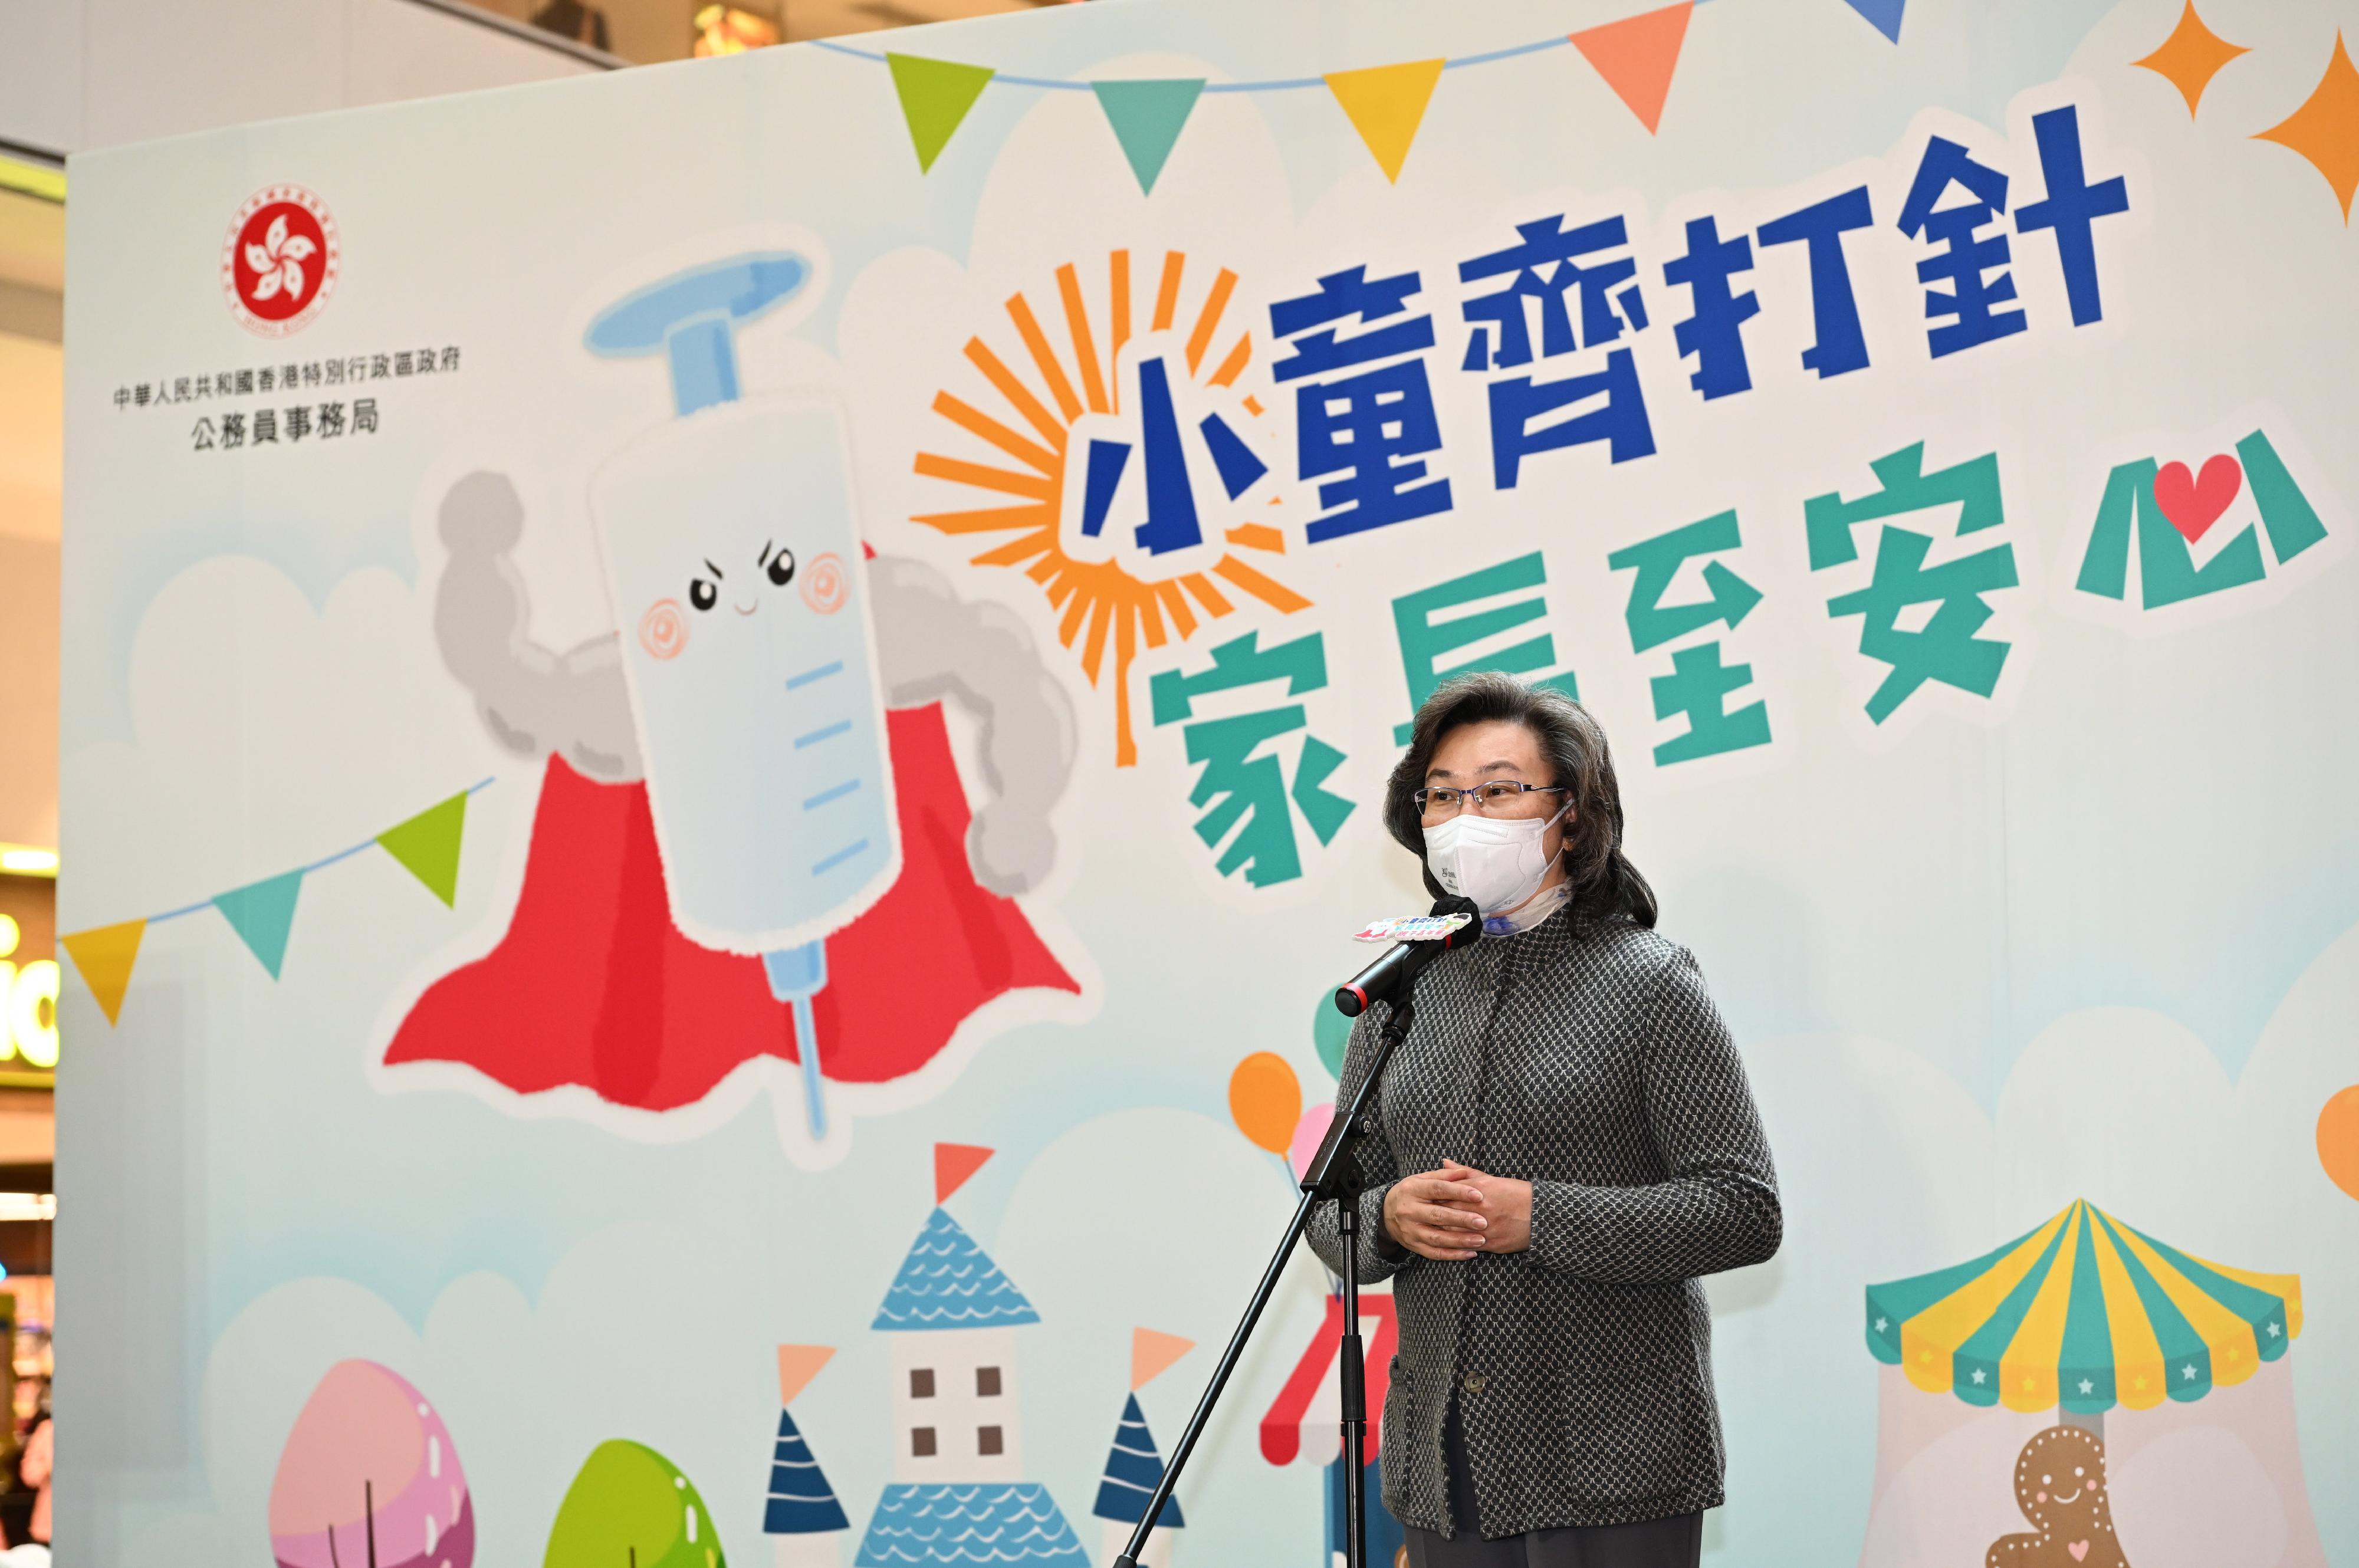 The Secretary for the Civil Service, Mrs Ingrid Yeung, attended "Children with jabs, parents with ease" parent-child activities held by the Government at D·PARK in Tsuen Wan today (December 3) to promote COVID-19 vaccination of children. Mrs Yeung urged parents not to underestimate the effects and complications faced by young children without the protection conferred by the COVID-19 vaccine should they get infected and act fast to arrange COVID-19 vaccination for their children.